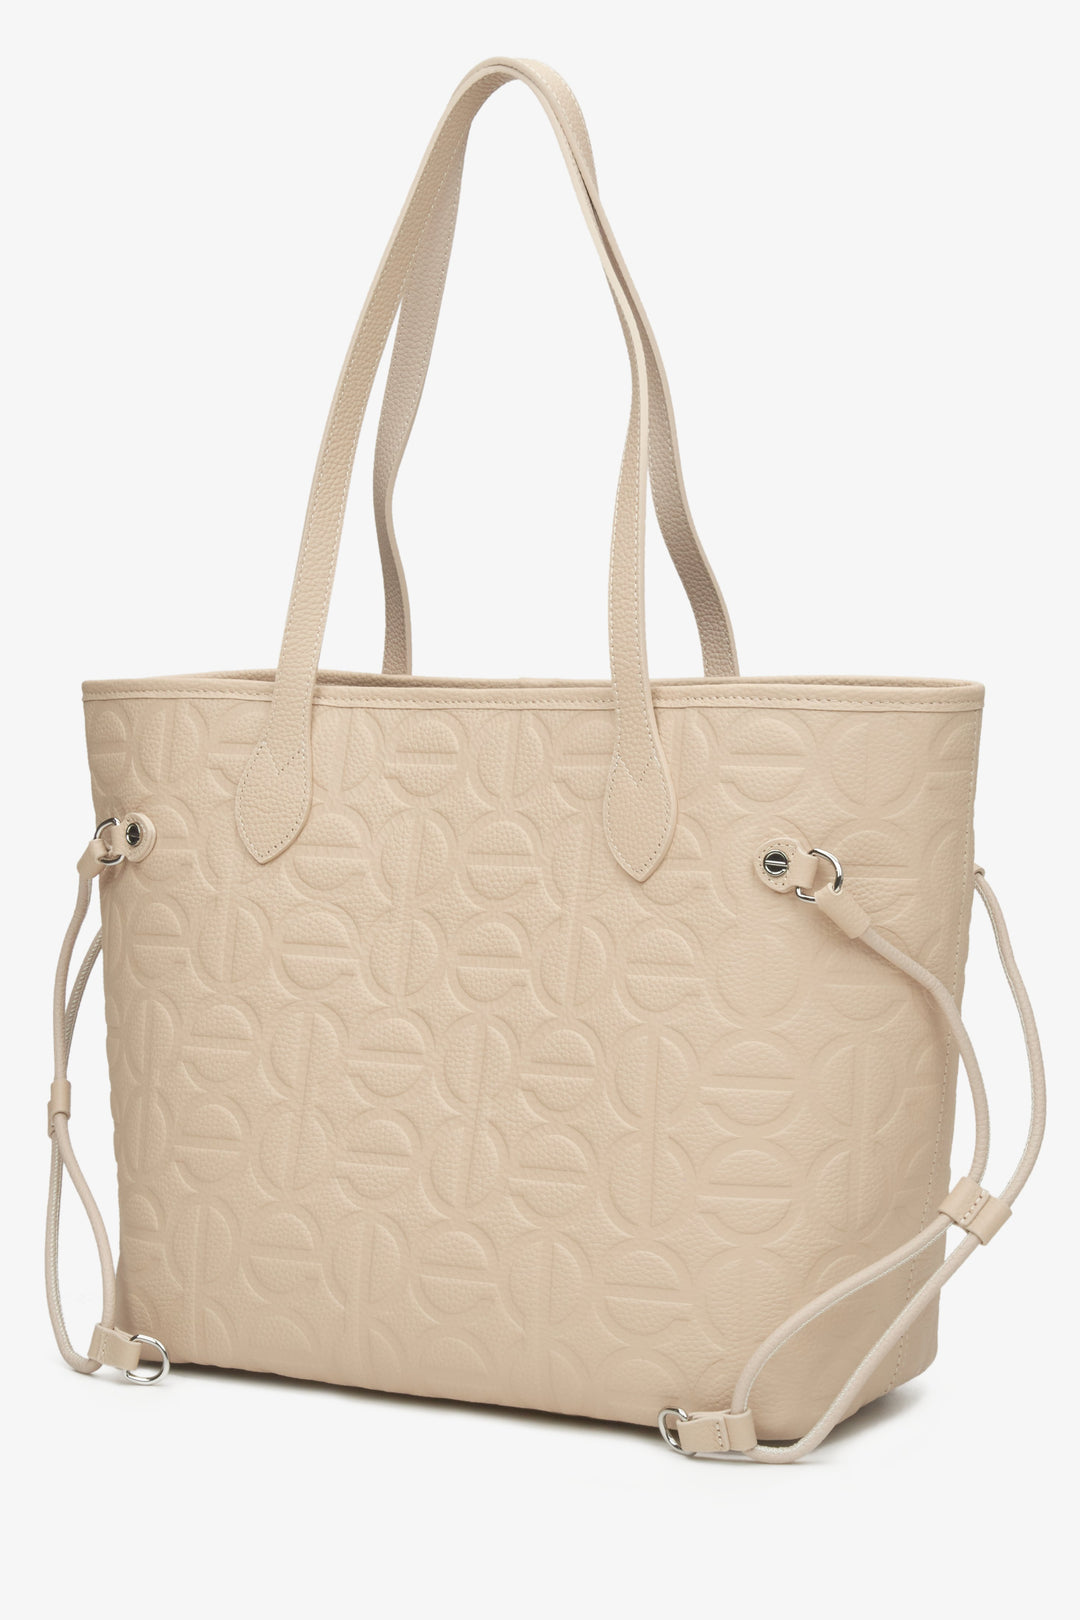 Women's beige leather shopper bag - perfect for spring.